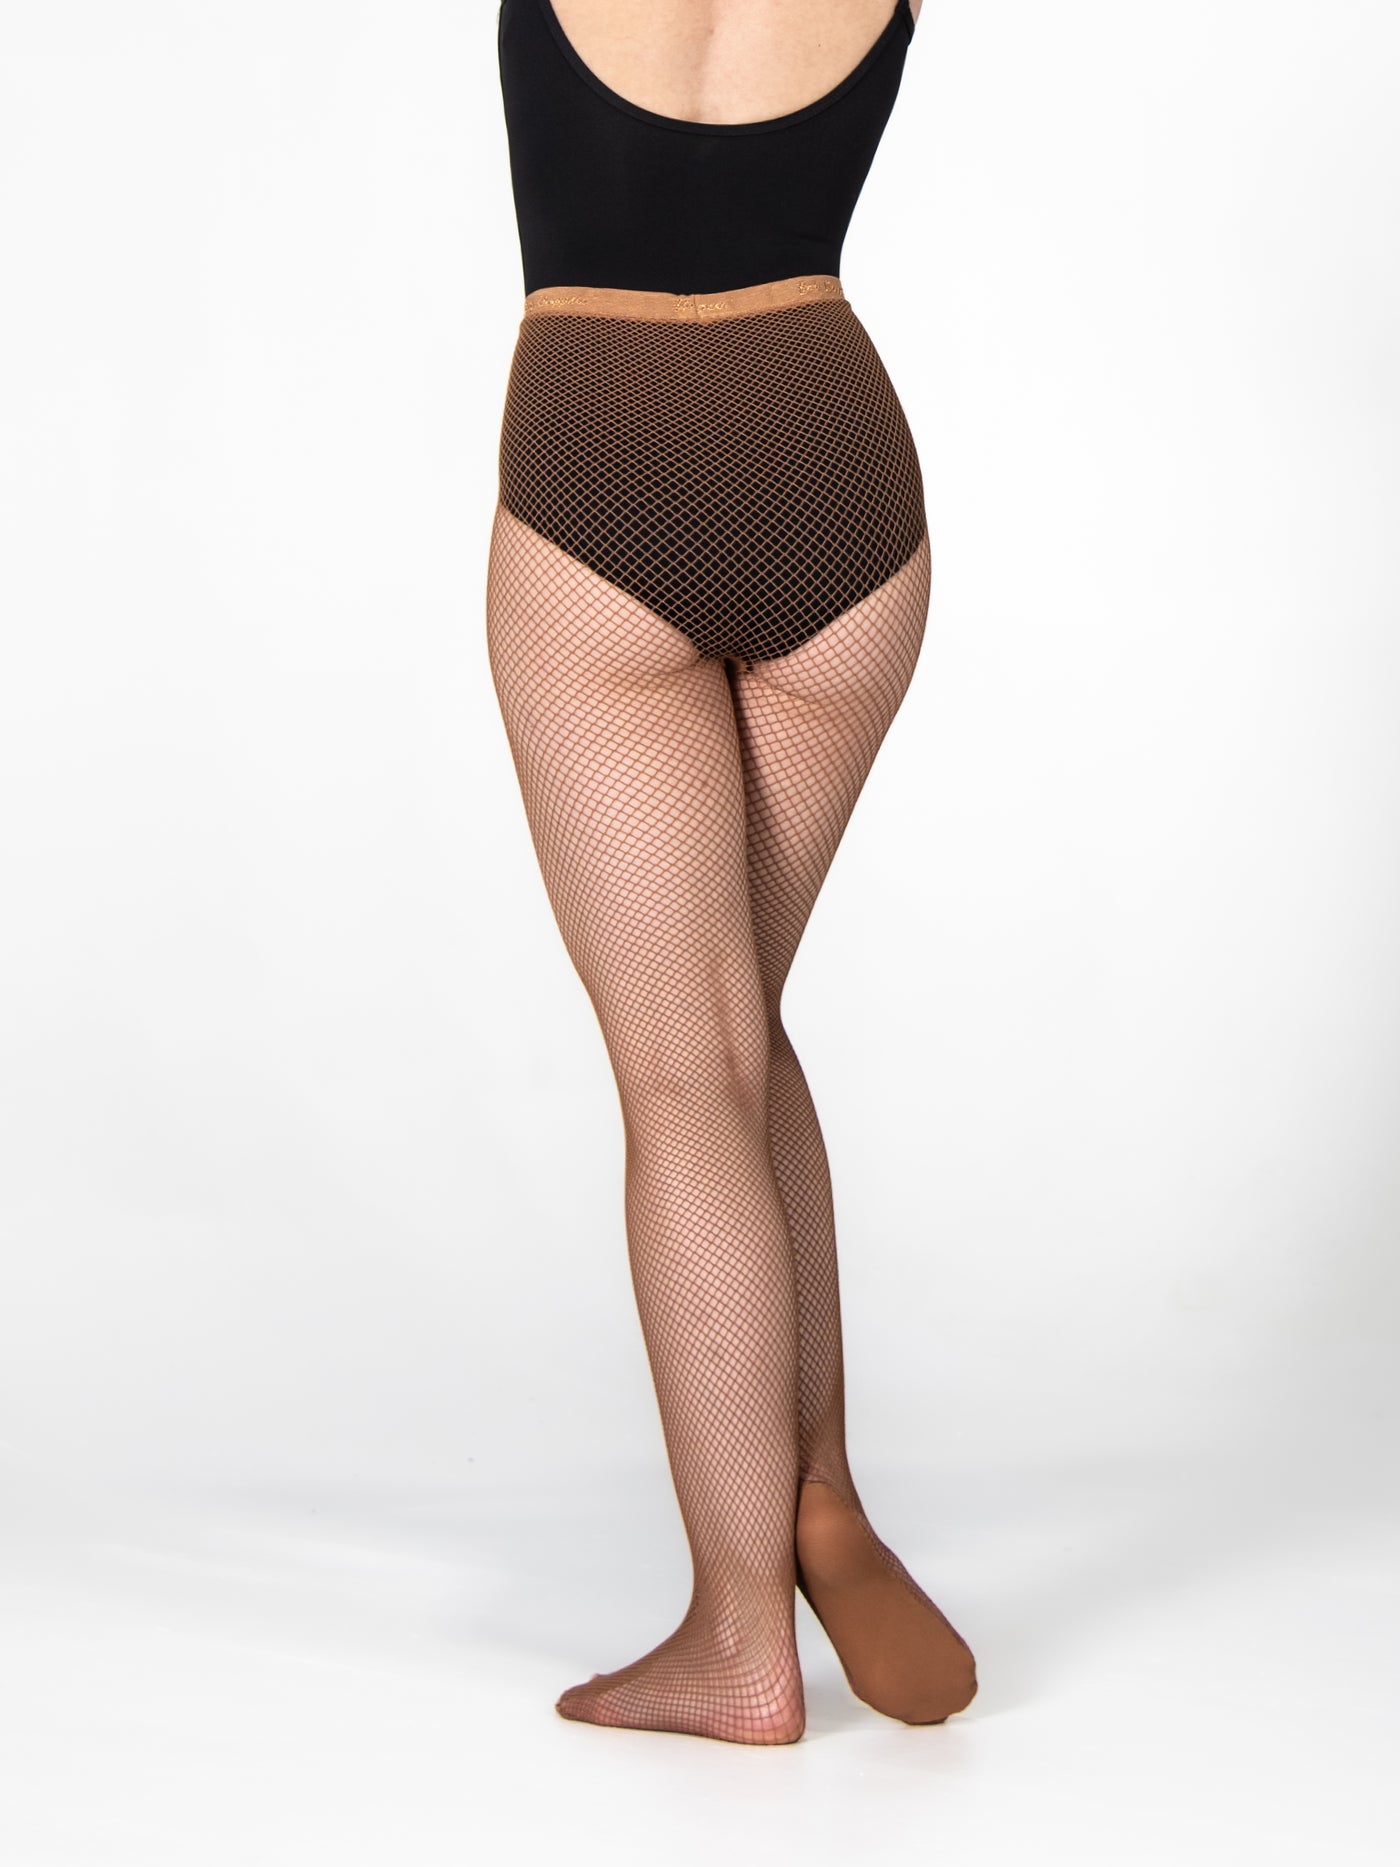 TotalSTRETCH Seamless Heavy Gauge Fishnet Padded Foot Tights